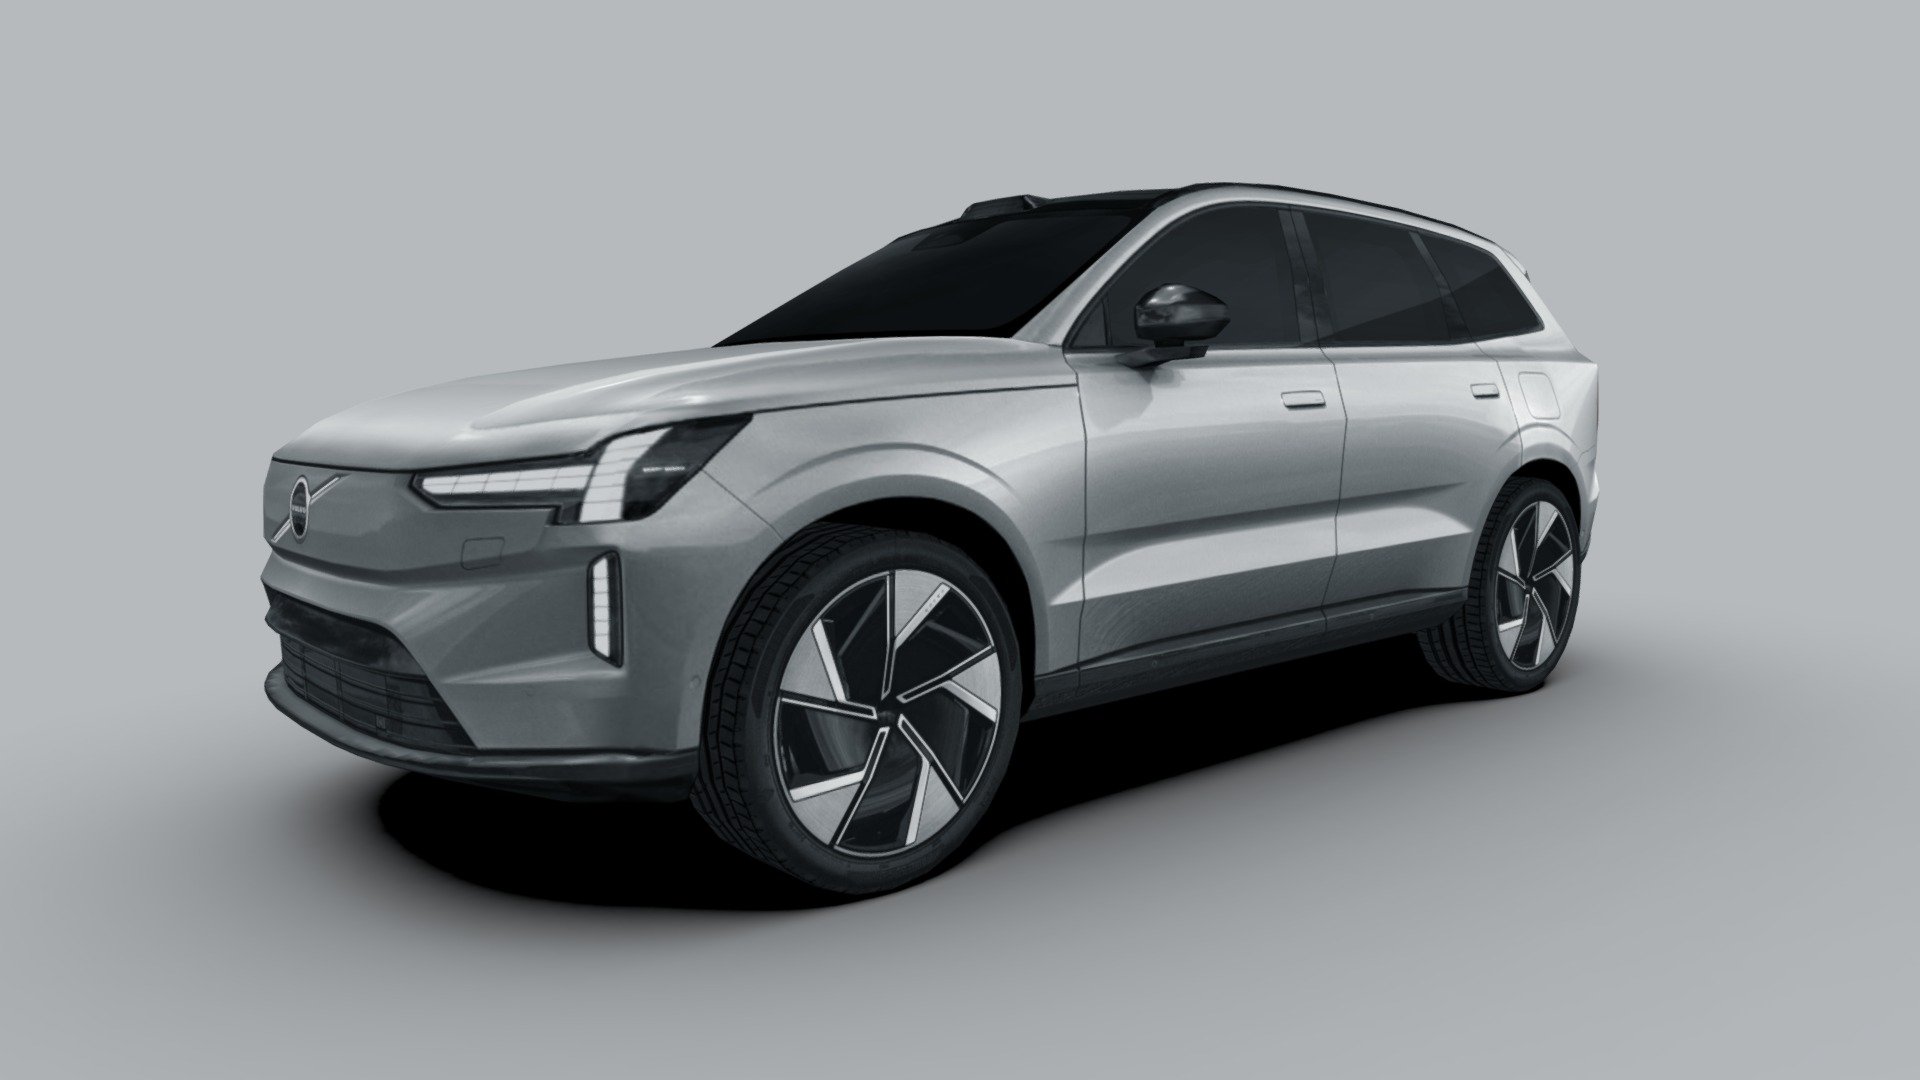 3d model of the 2024 Volvo EX90, an all-electric mid-size luxury crossover SUV.

The model is very low-poly, full-scale, real photos texture (single 2048 x 2048 png).

Package includes 5 file formats and texture (3ds, fbx, dae, obj and skp)

Hope you enjoy it.

José Bronze - Volvo EX90 2024 - Buy Royalty Free 3D model by Jose Bronze (@pinceladas3d) 3d model